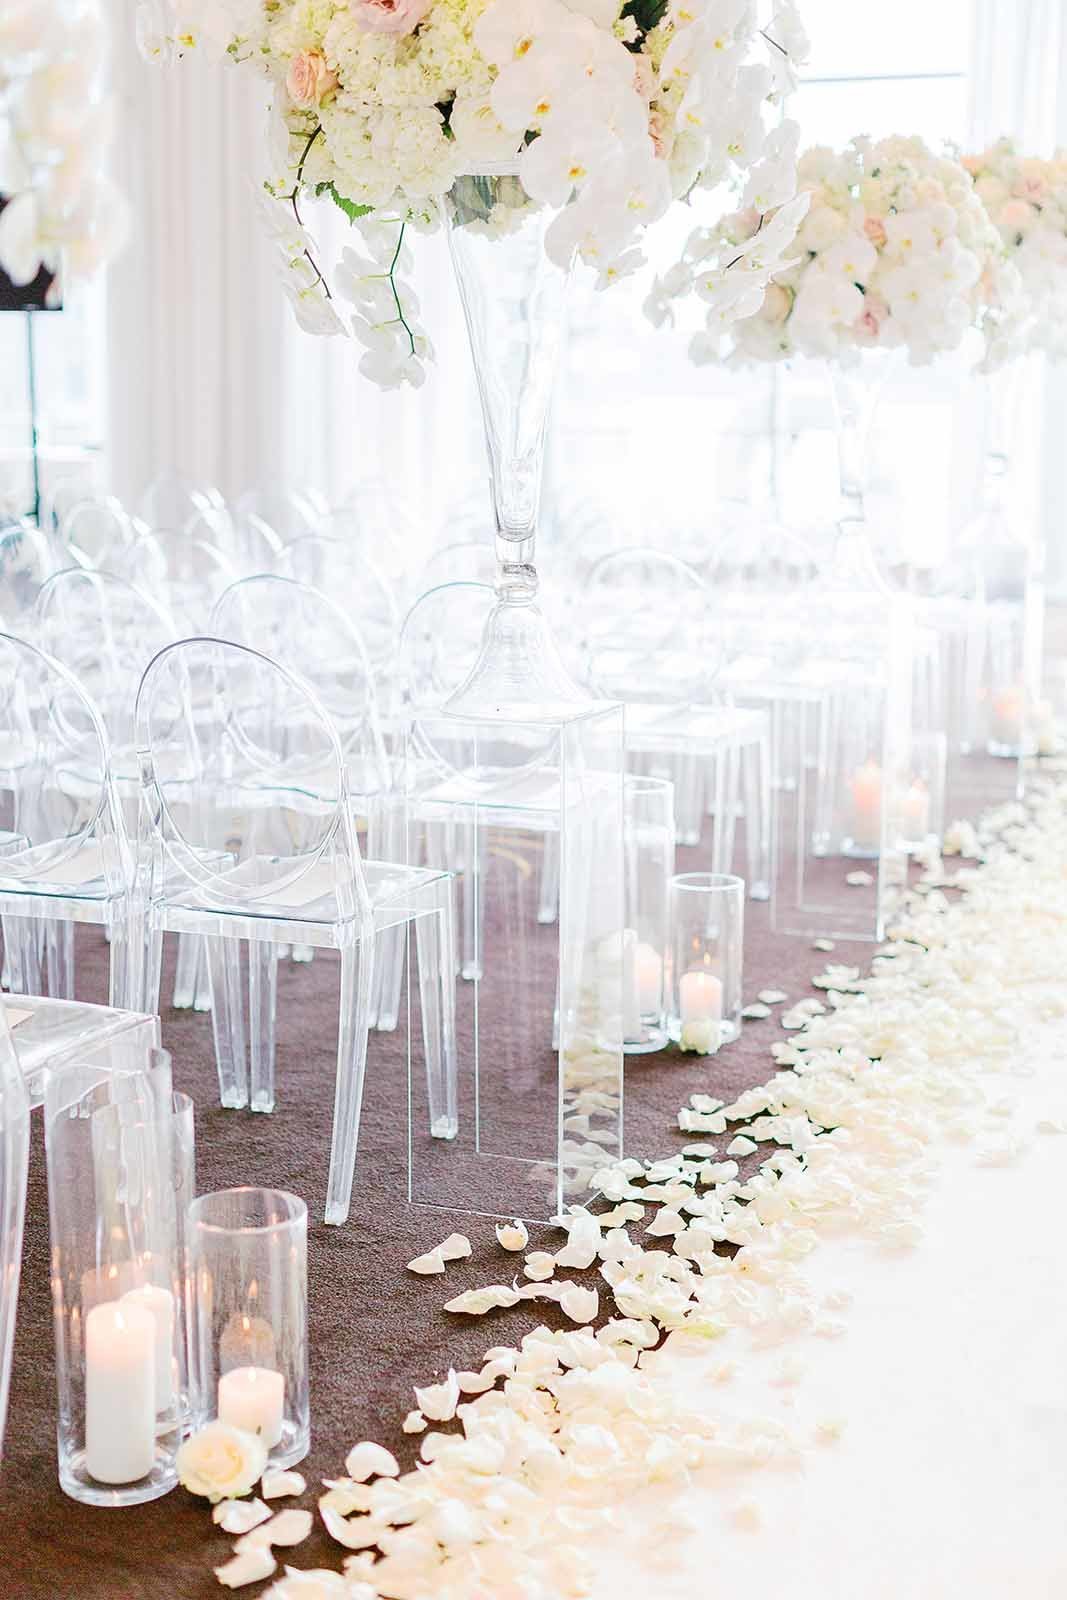 wedding ceremony aisle with large white flower arrangements, hurricane candles, white rose petals, white aisle runner, and clear lucite chairs